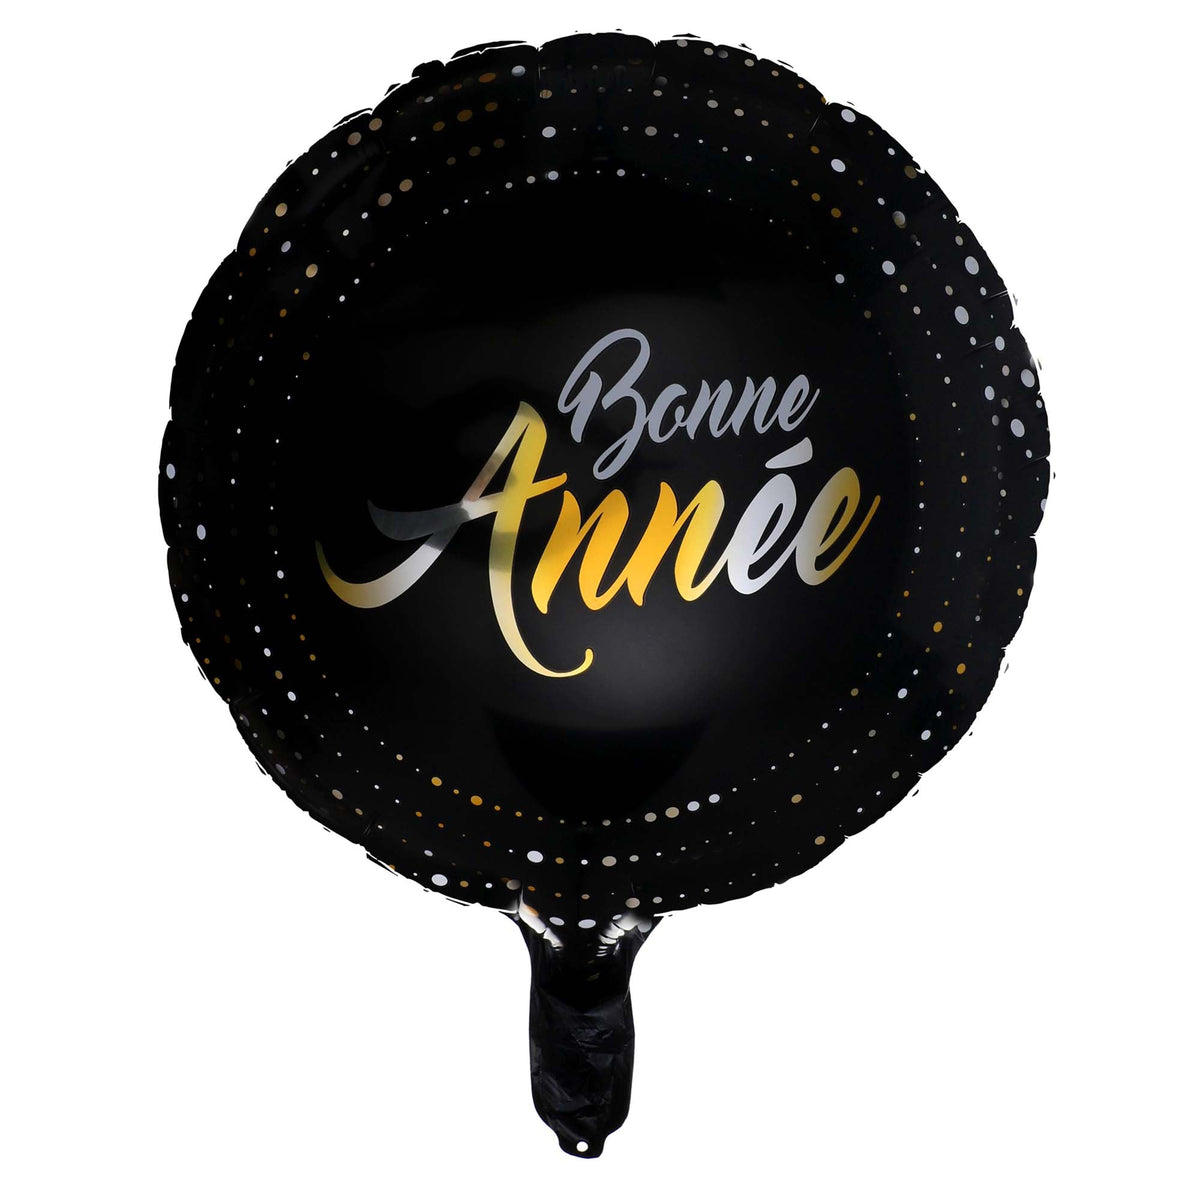 SANTEX Balloons "Bonne Année" Round Foil Balloon, Black and Gold, 18 Inches, 1 Count